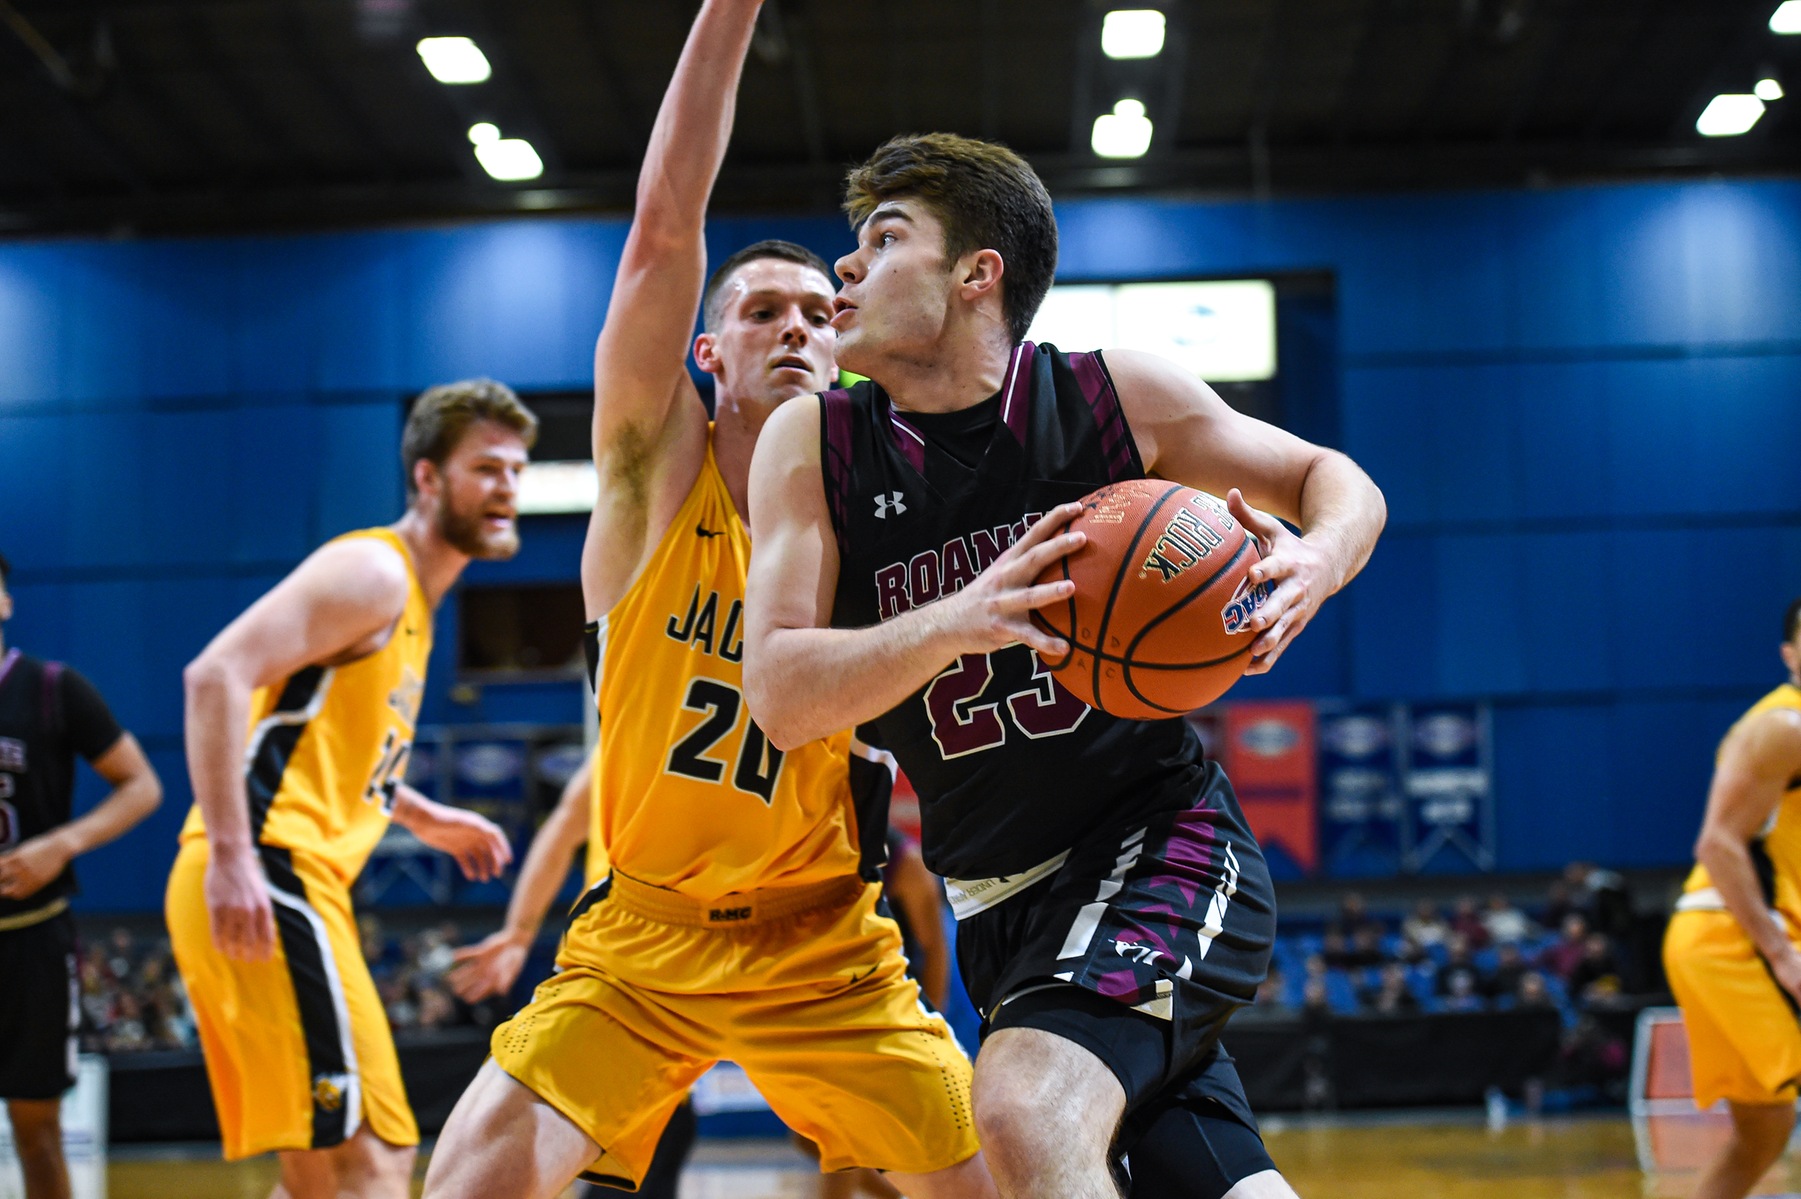 Top-seed Randolph-Macon used a 13-2 run in the final minutes of the game to escape with a 60-59 over fifth-seeded Roanoke in Semifinals of the 2020 ODAC Semifinals on Saturday.